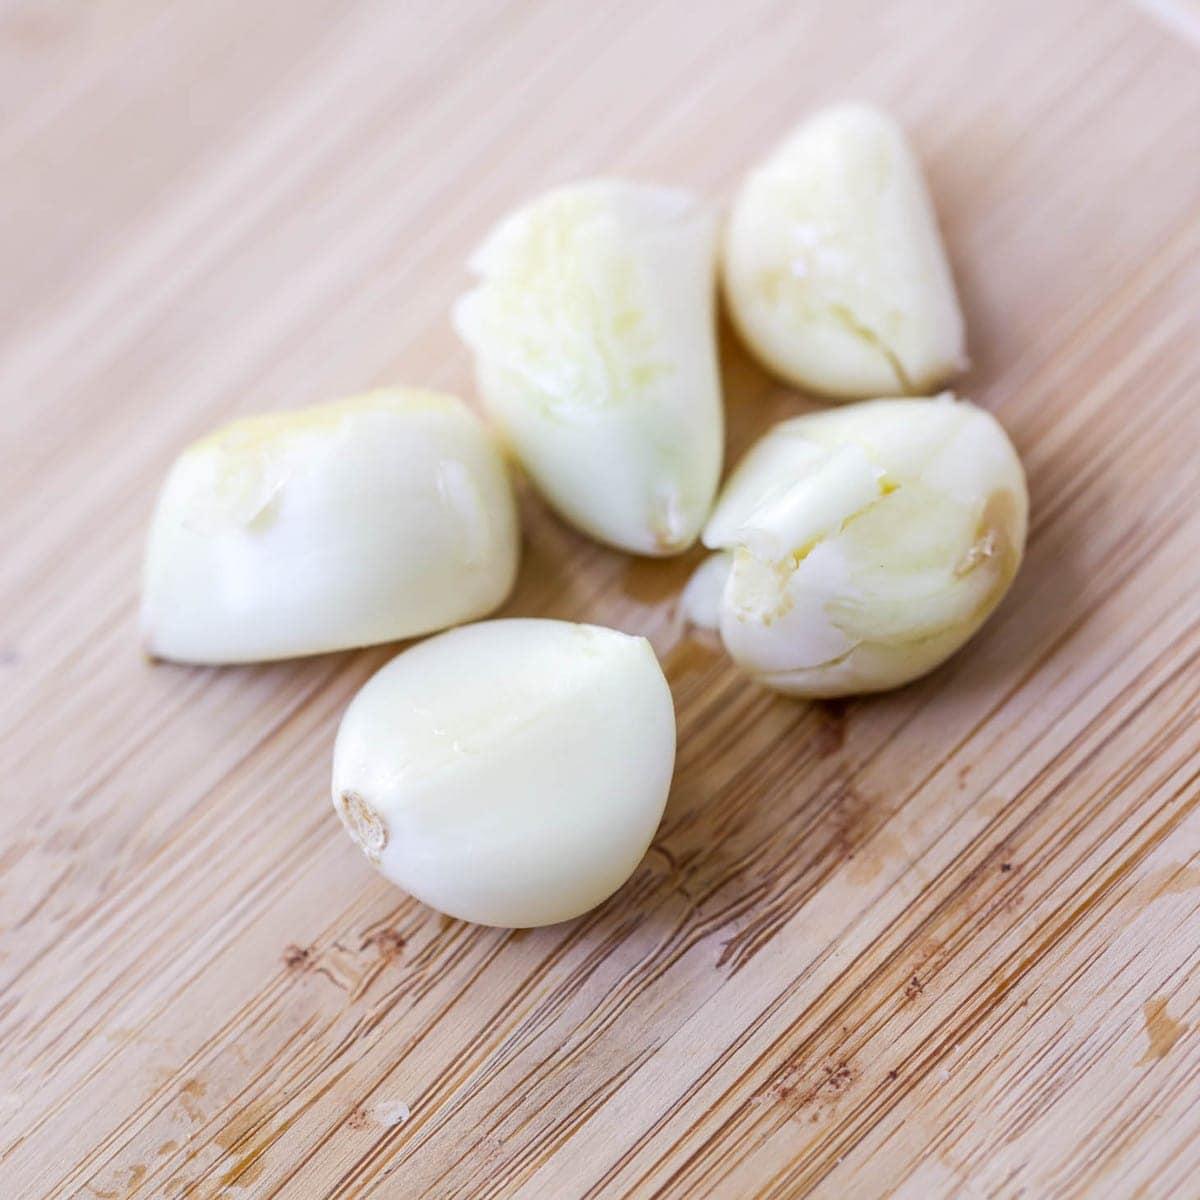 Five peeled garlic cloves ready to be minced.